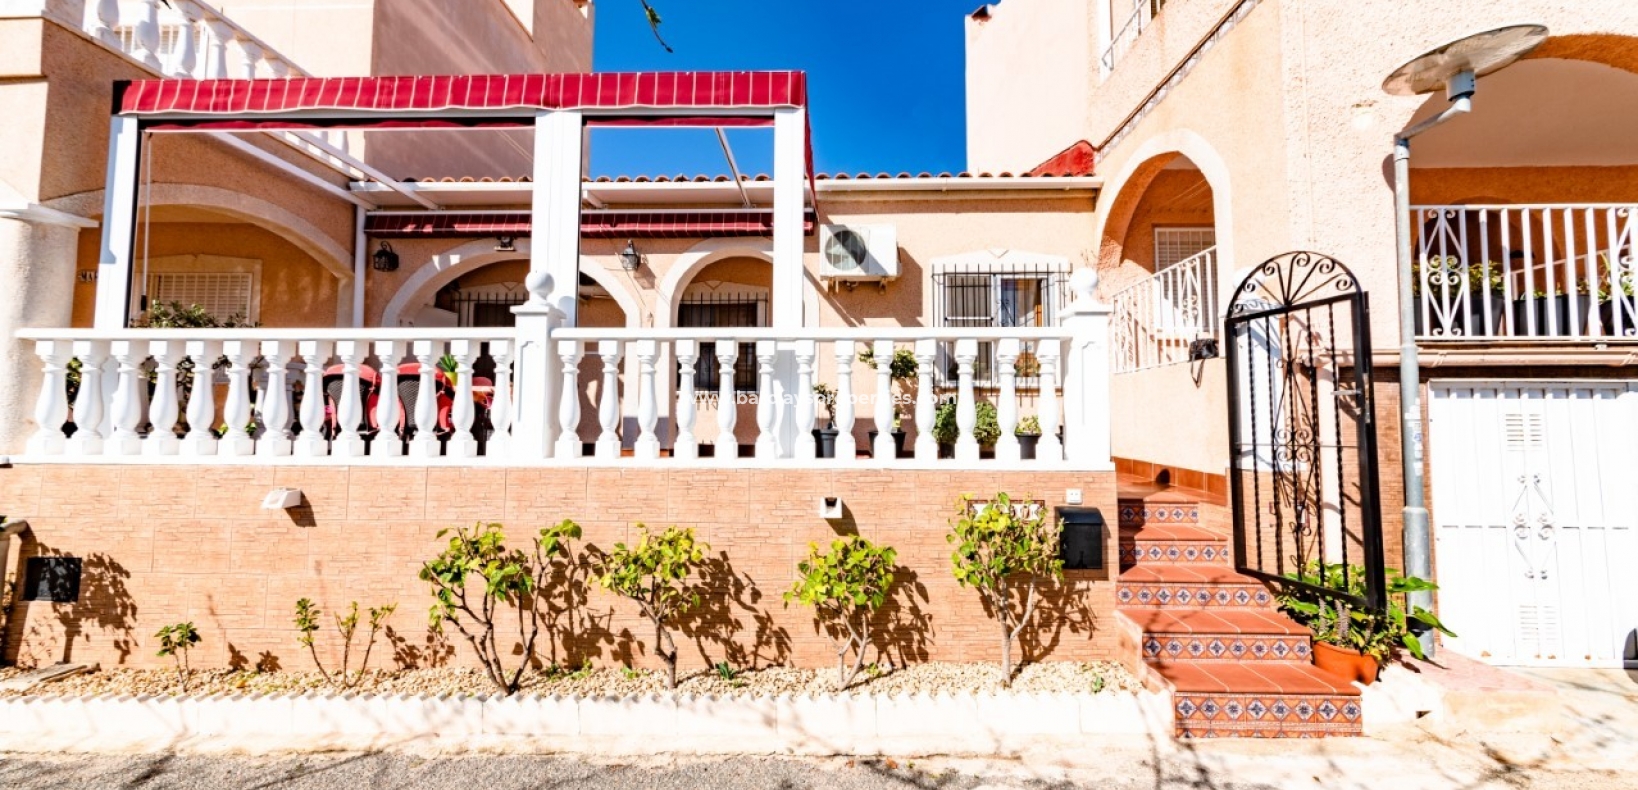 Main View - Terraced Property for sale in Urbanisation La Marina